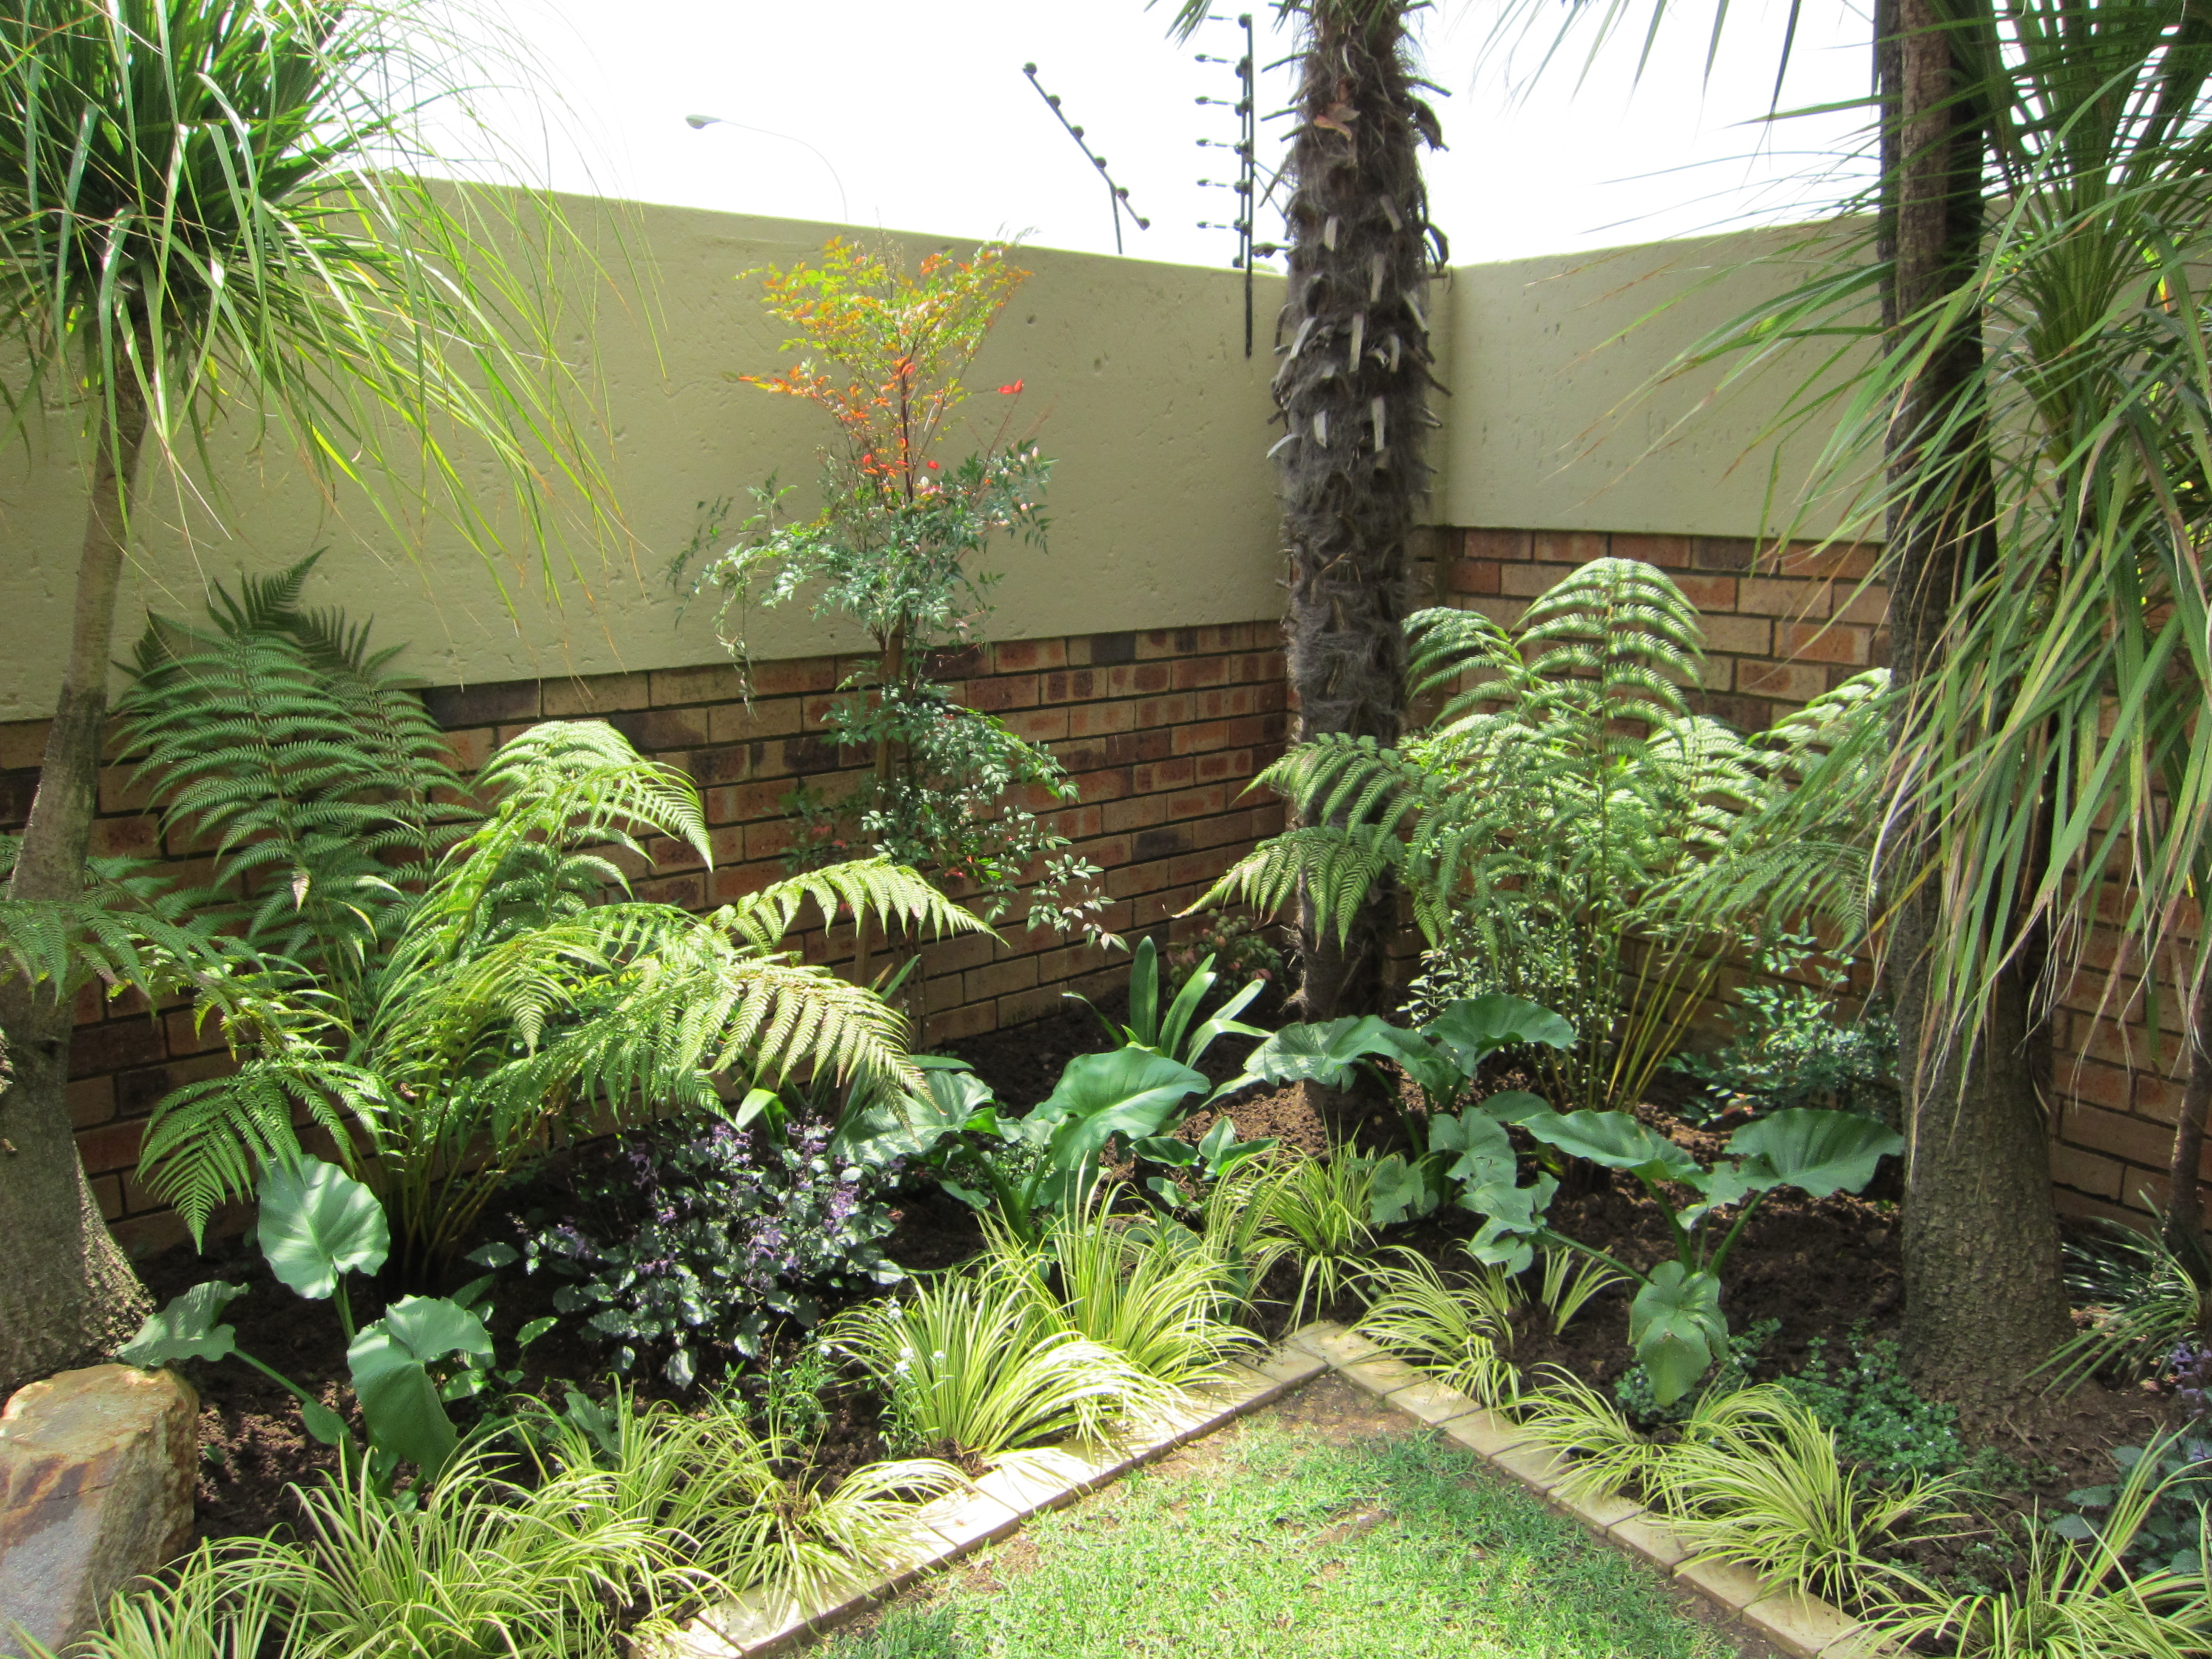 Tropical Garden Plants 86434243 Tropical garden plants make all the ...